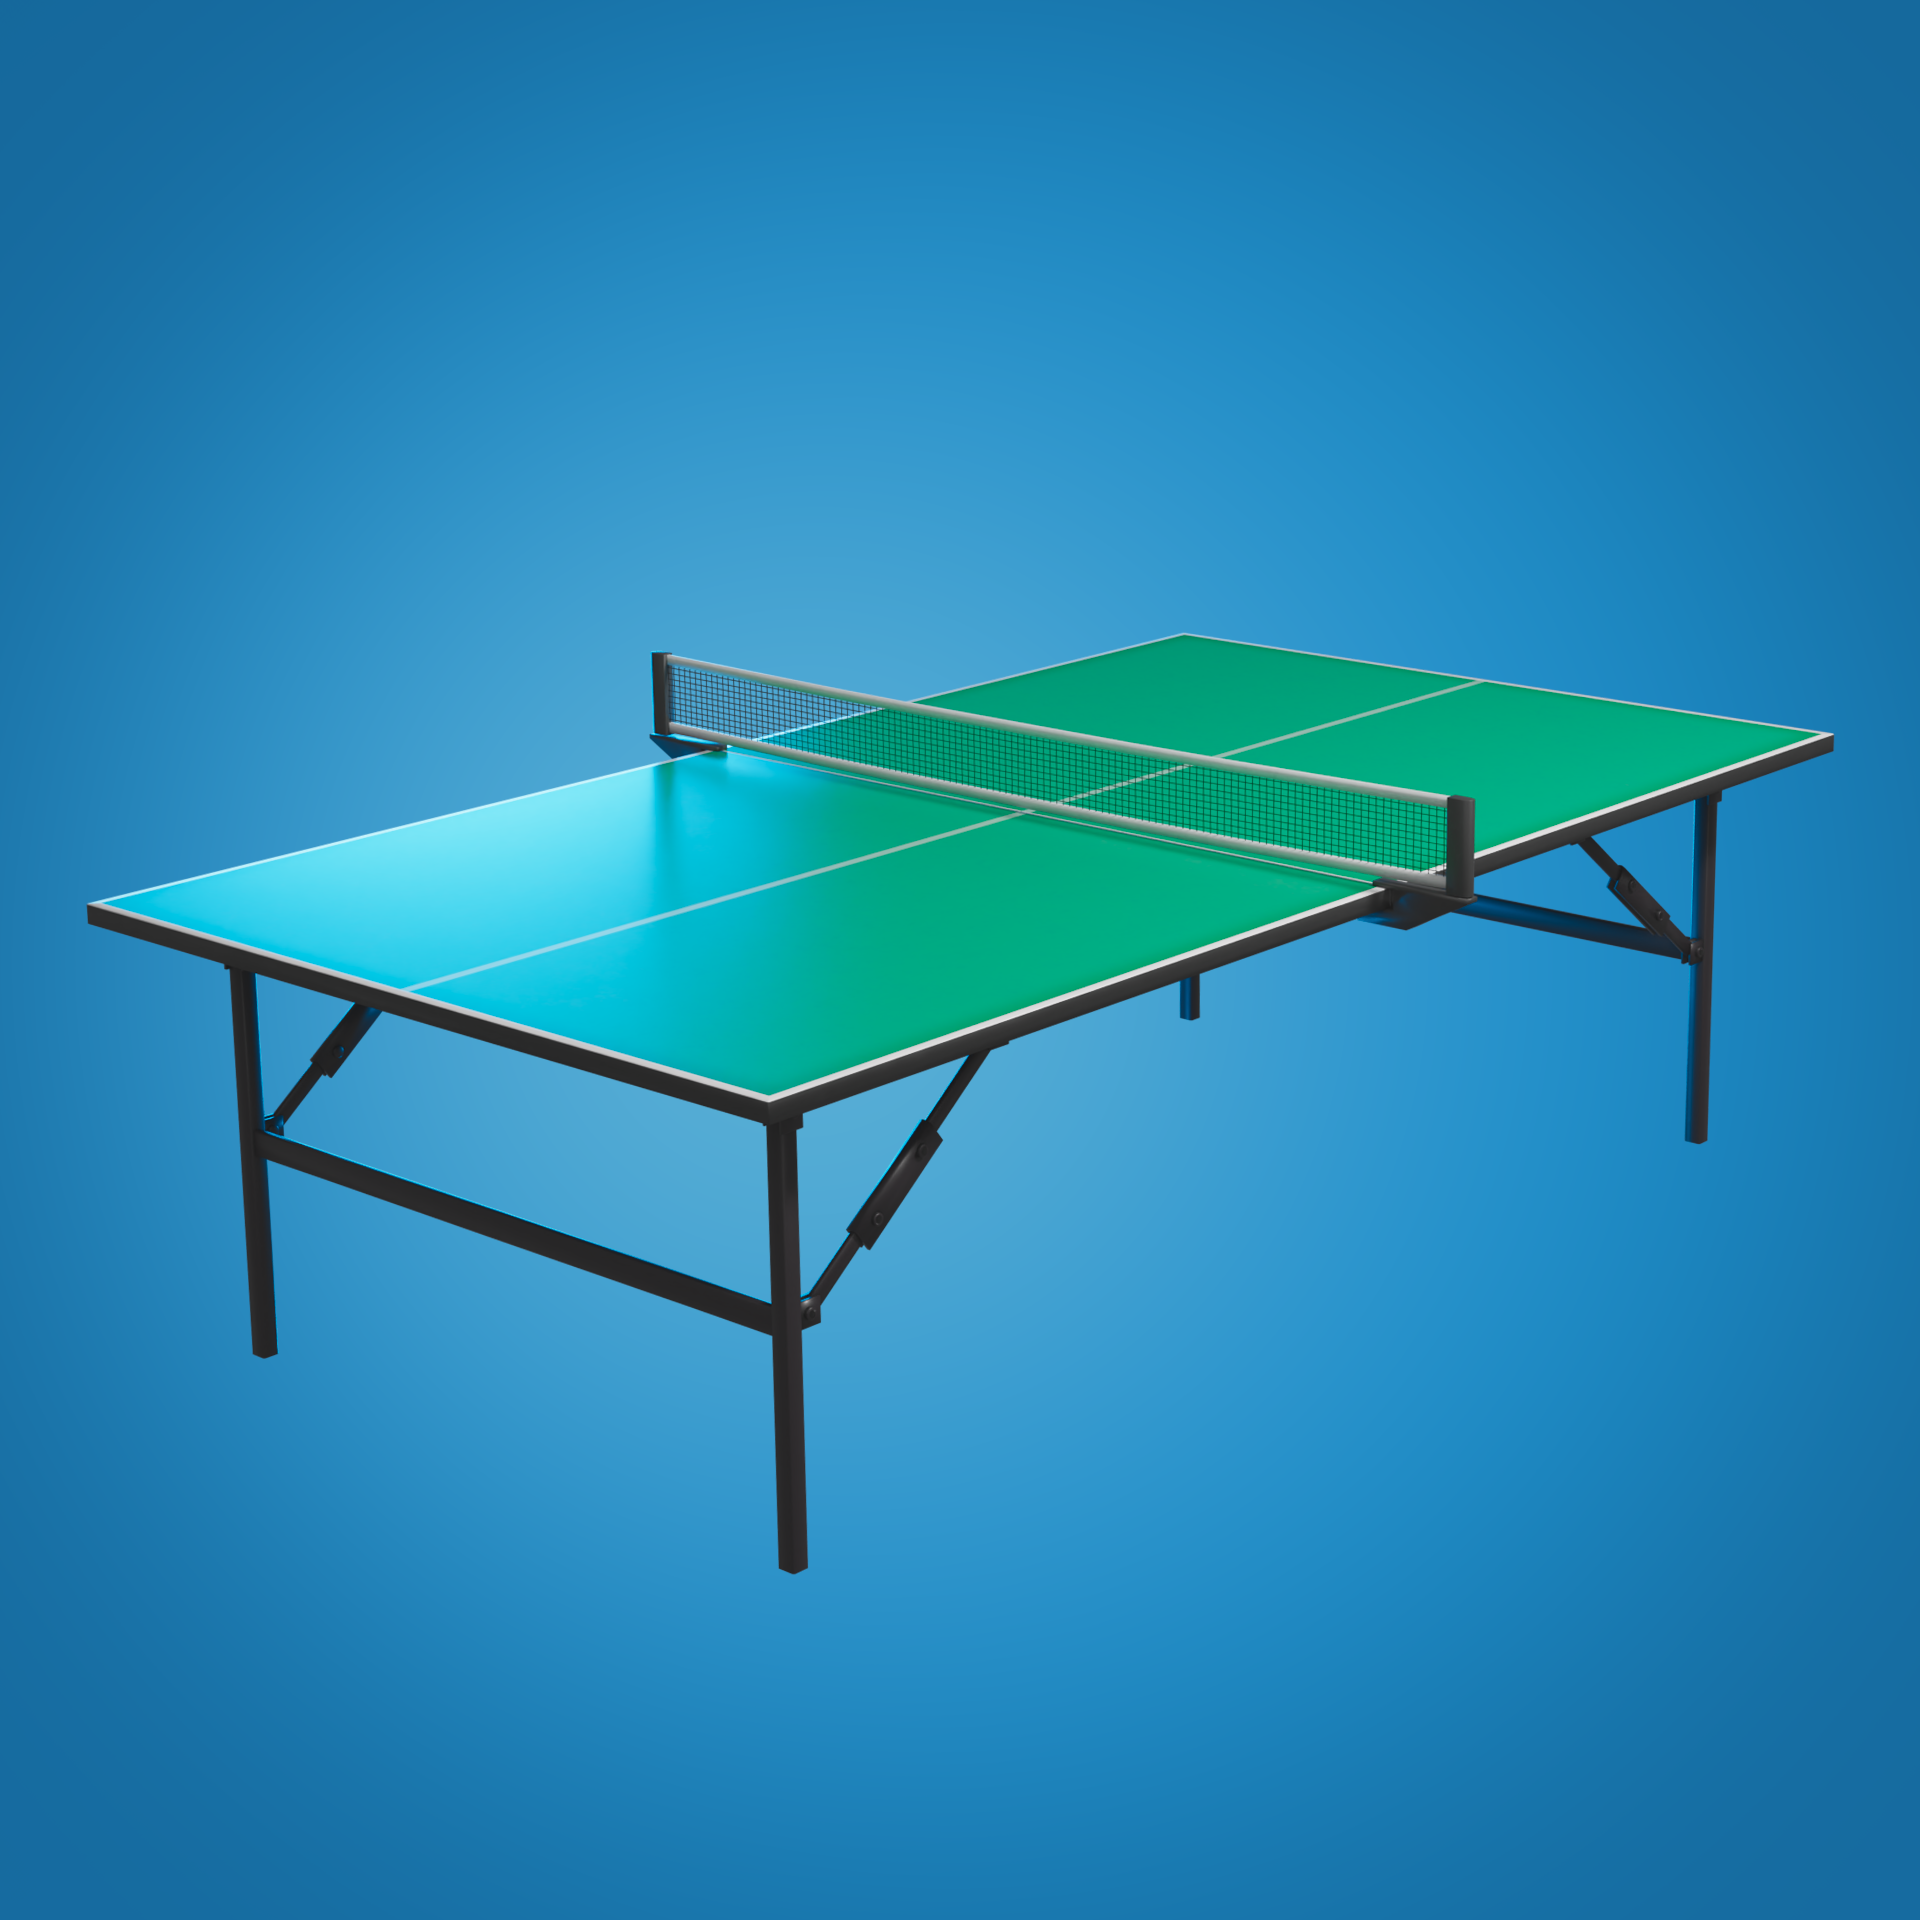 PingPong_net_and_table_02_v002.png